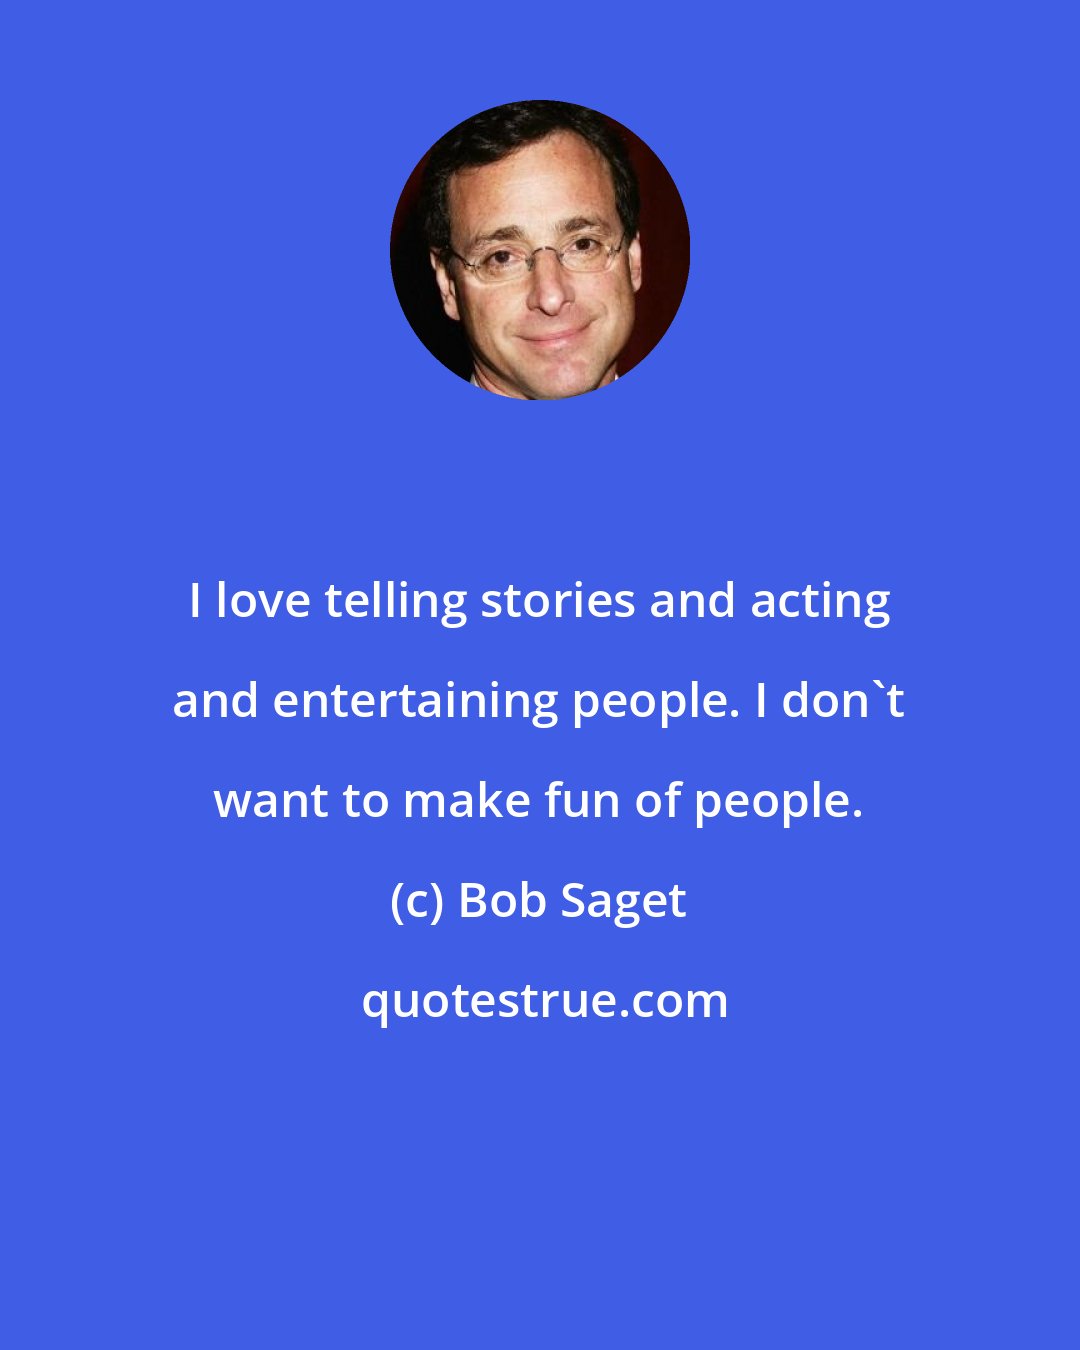 Bob Saget: I love telling stories and acting and entertaining people. I don't want to make fun of people.